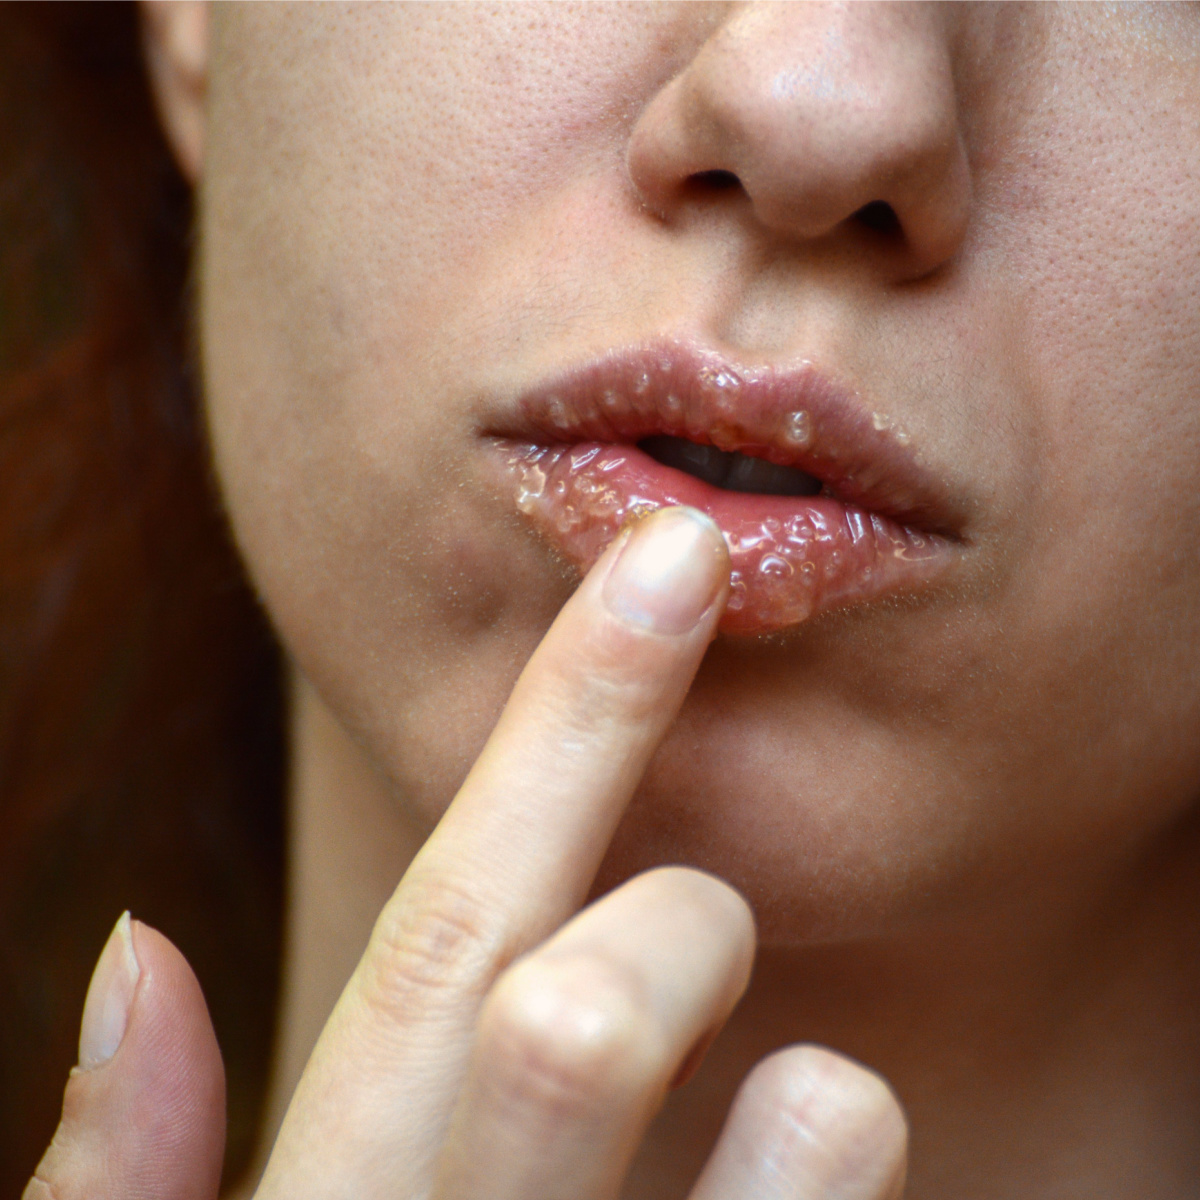 woman applying homemade lip scrub to lips with fingers